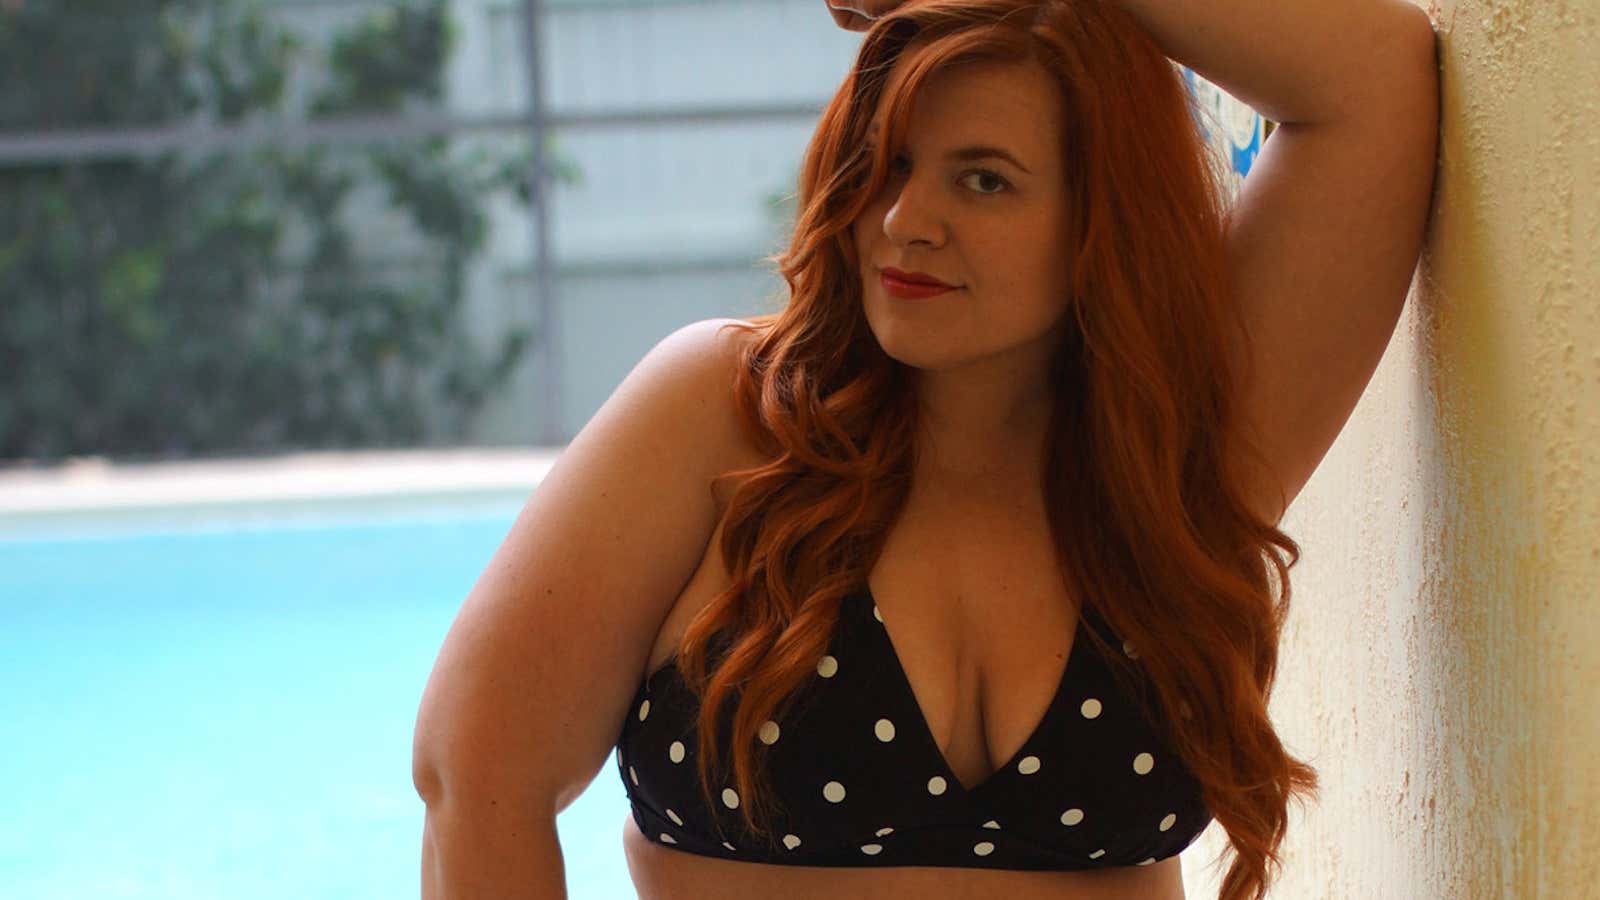 What it feels like to be the internet’s token fat girl